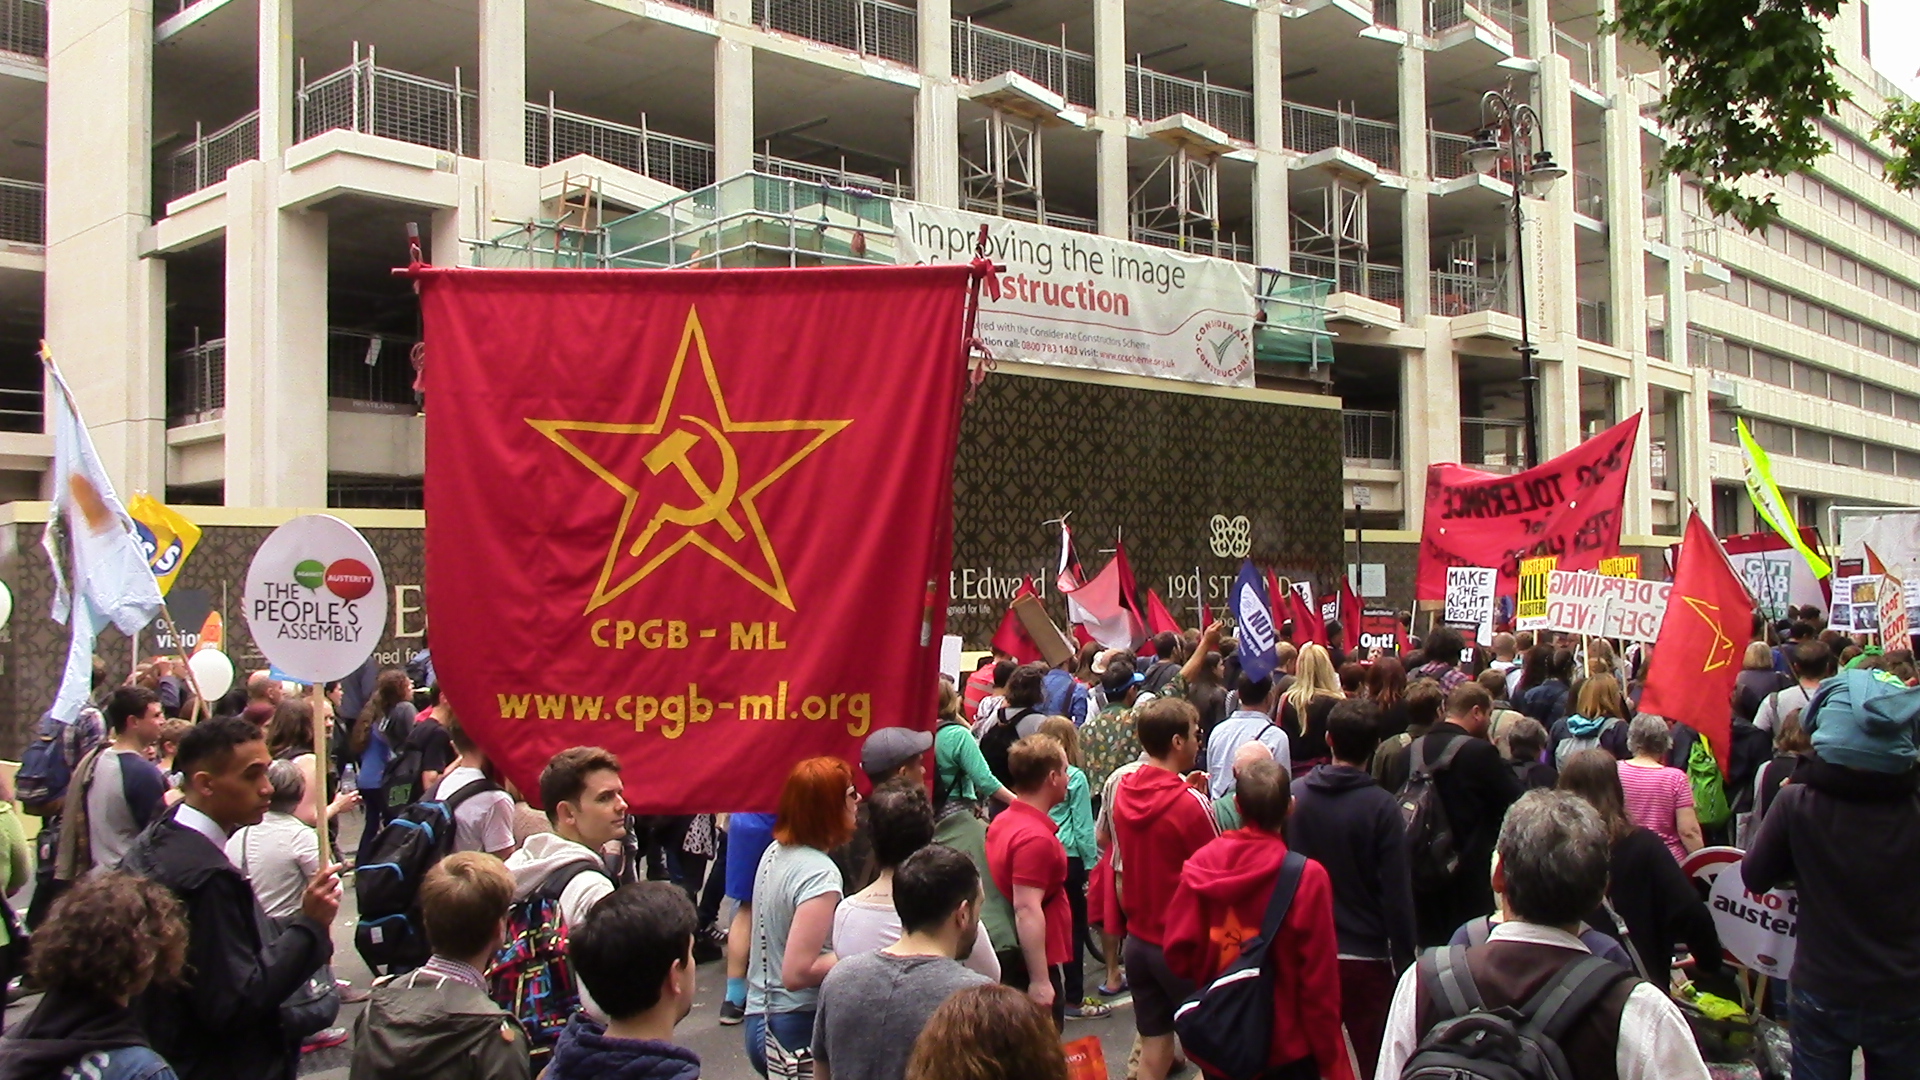 CPGB-ML on march